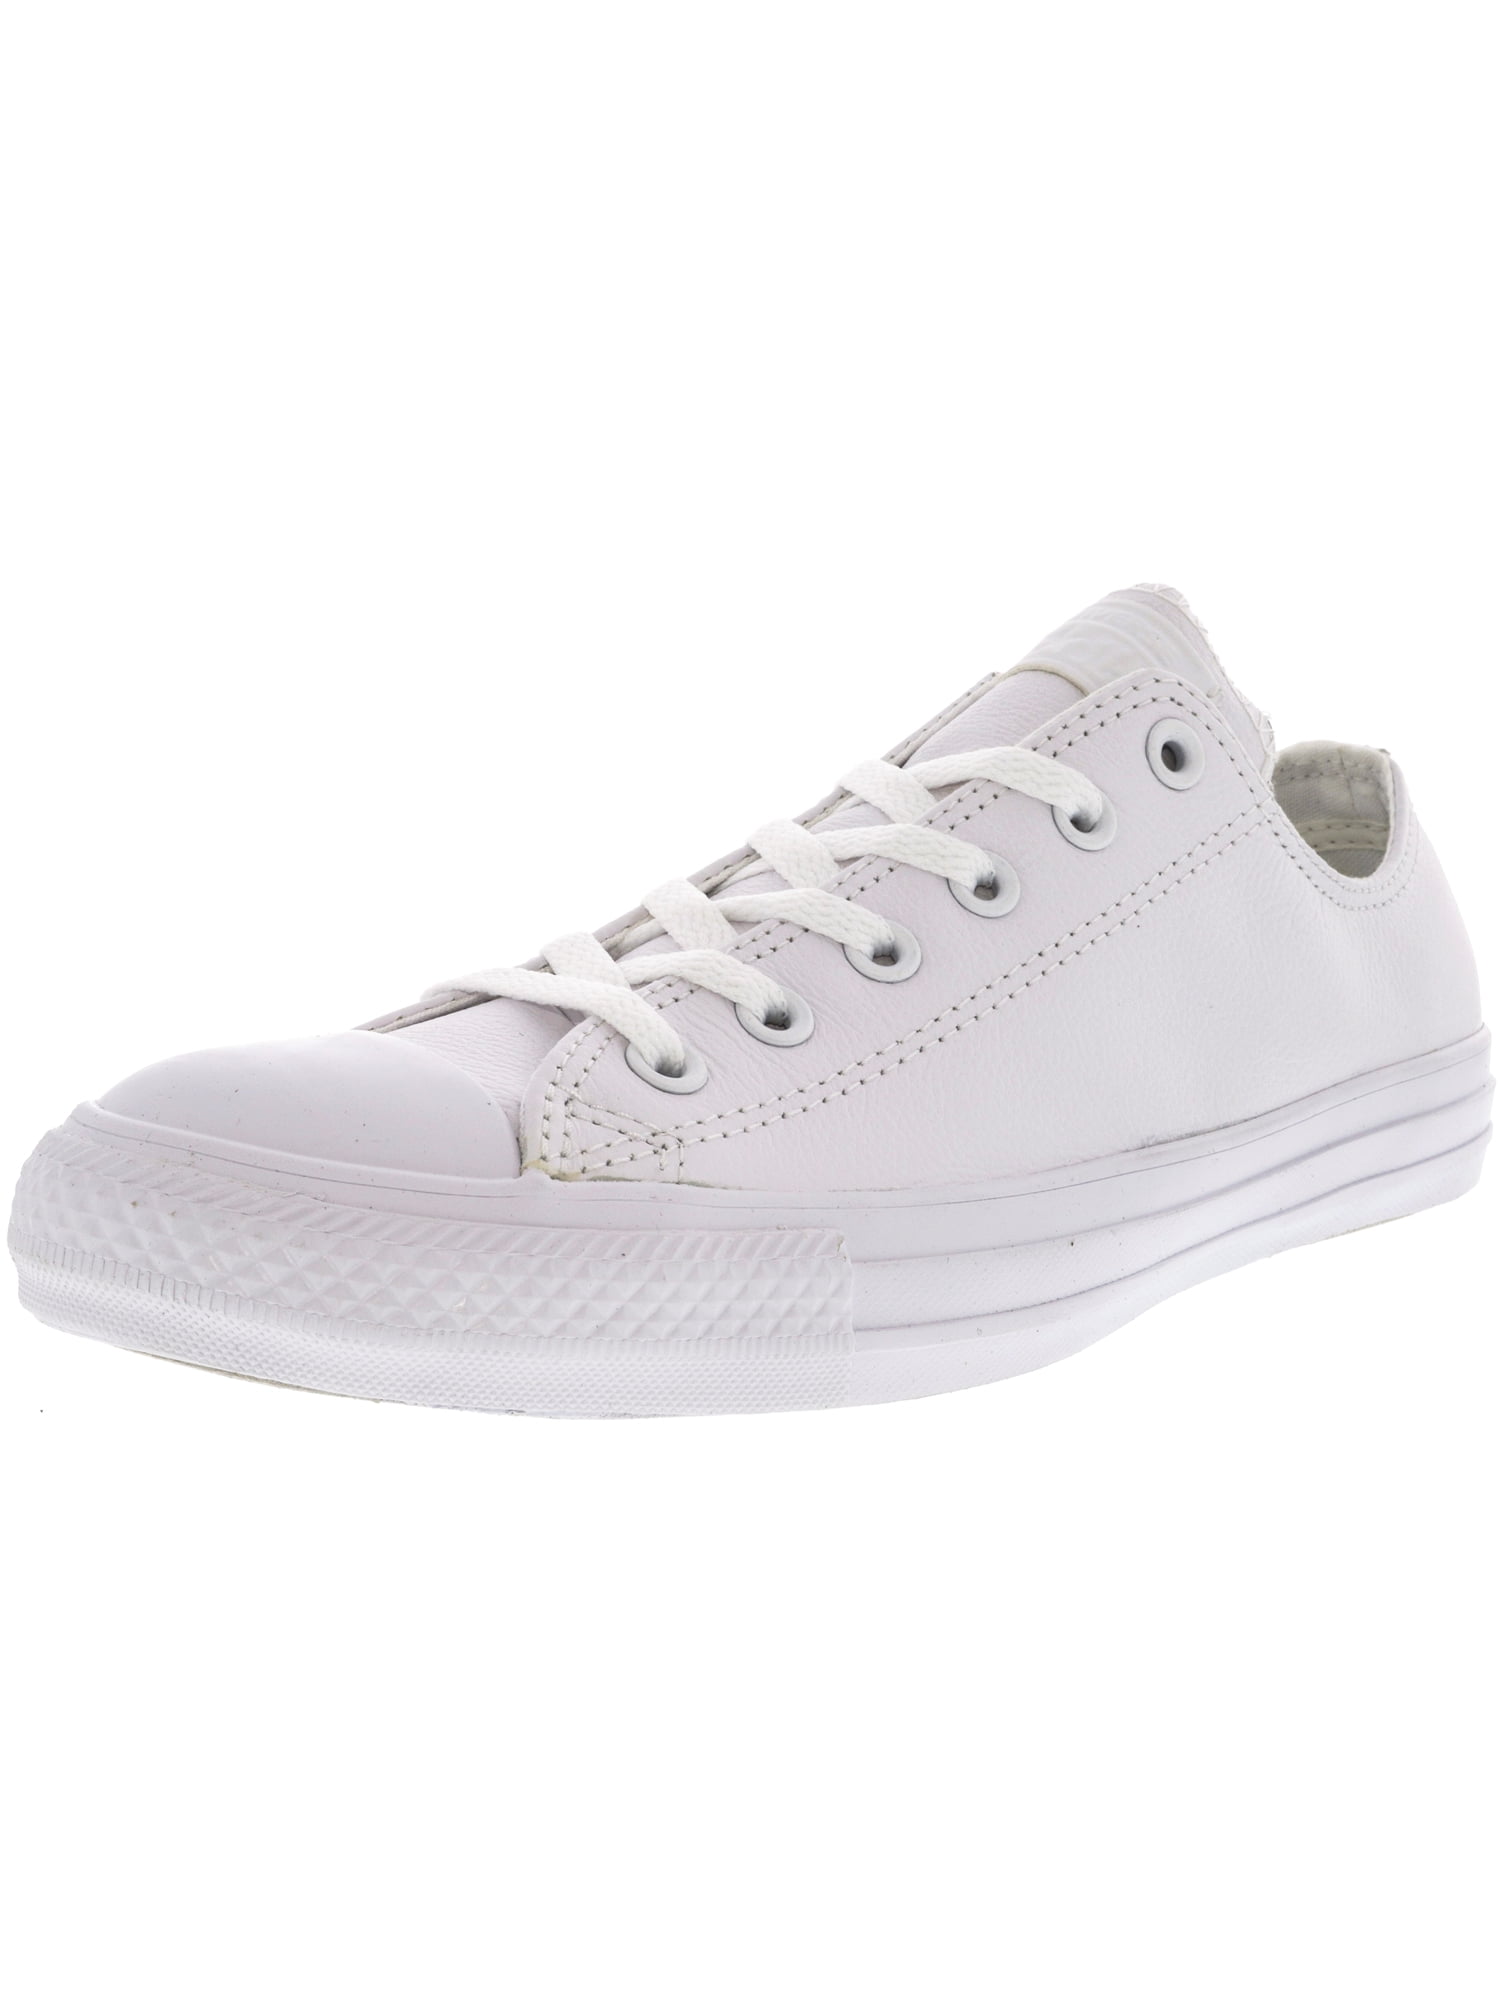 fryser Række ud bind Converse Unisex All Star Optical White Shoes Leather Low Top Sneakers  132173C - Walmart.com